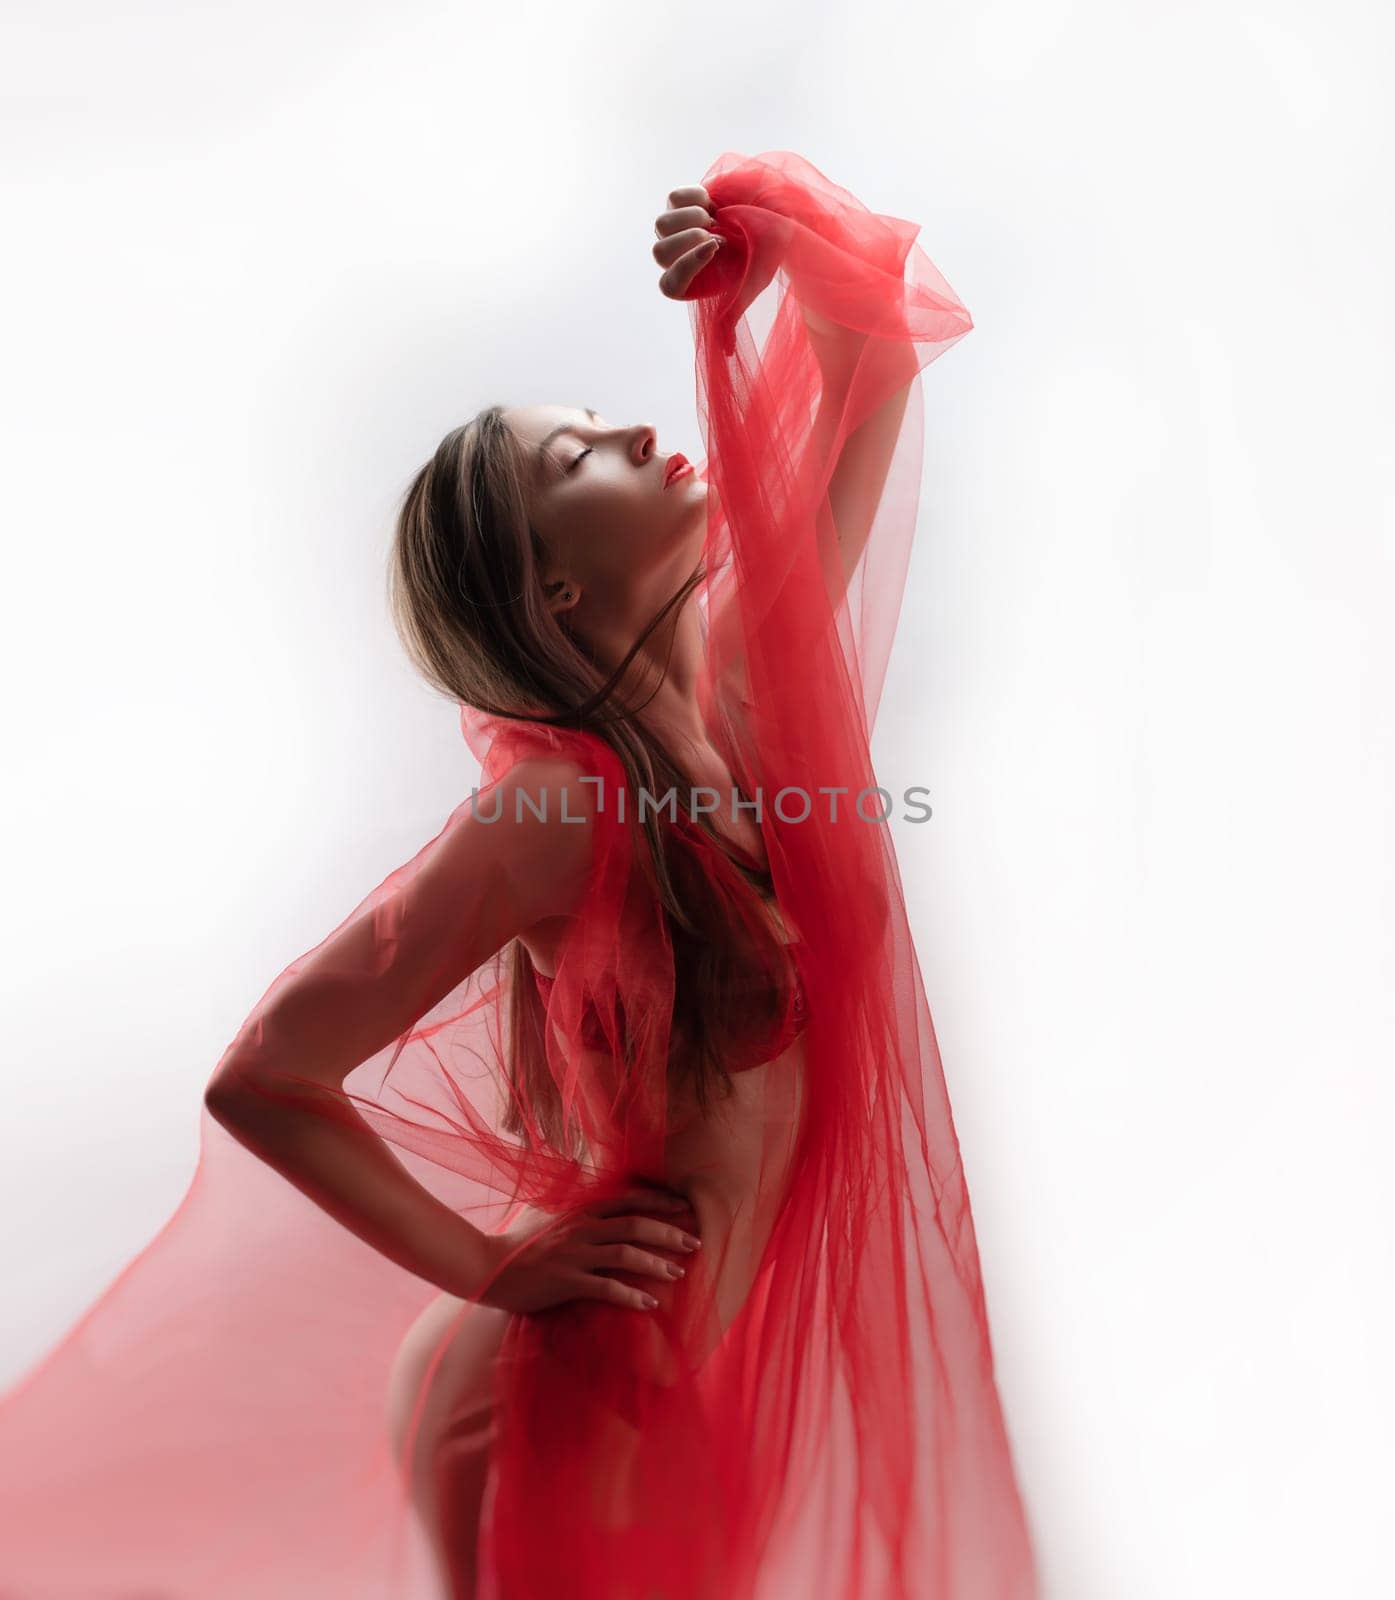 sexy girl with red transparent fabric on a white background copy paste